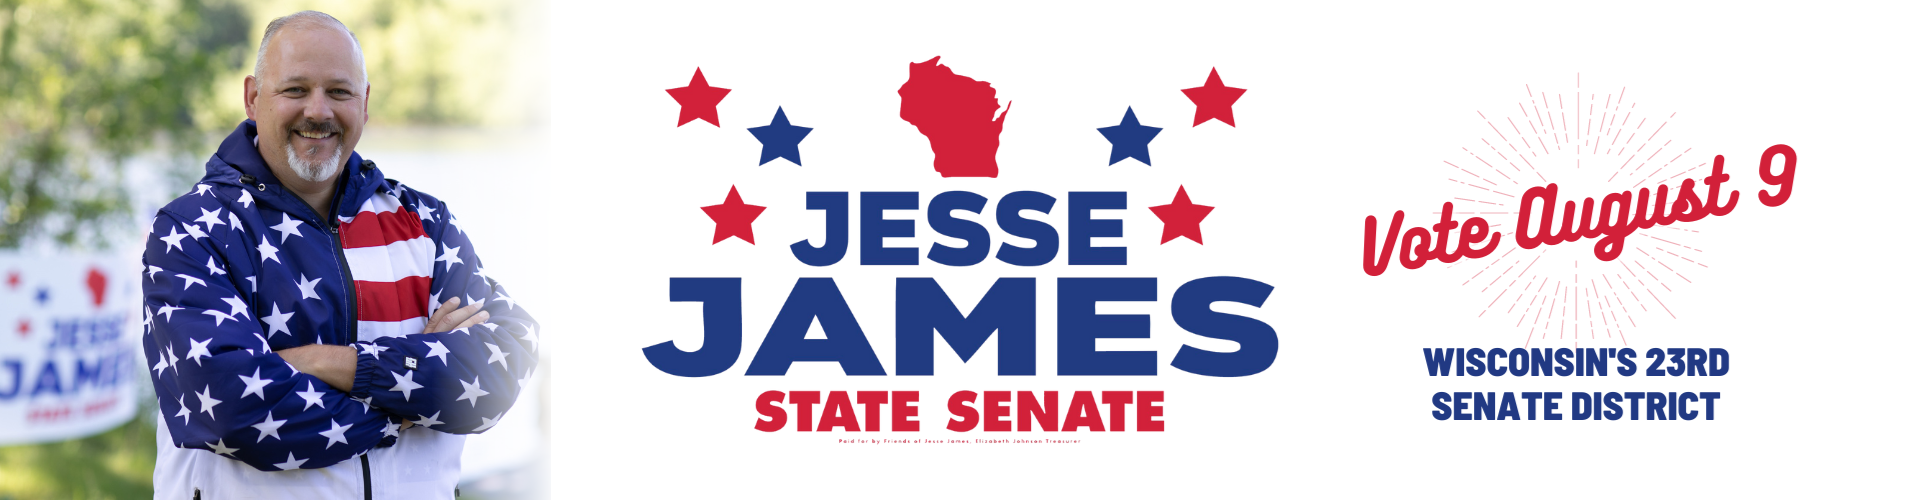 Jesse James for the 23rd Senate District